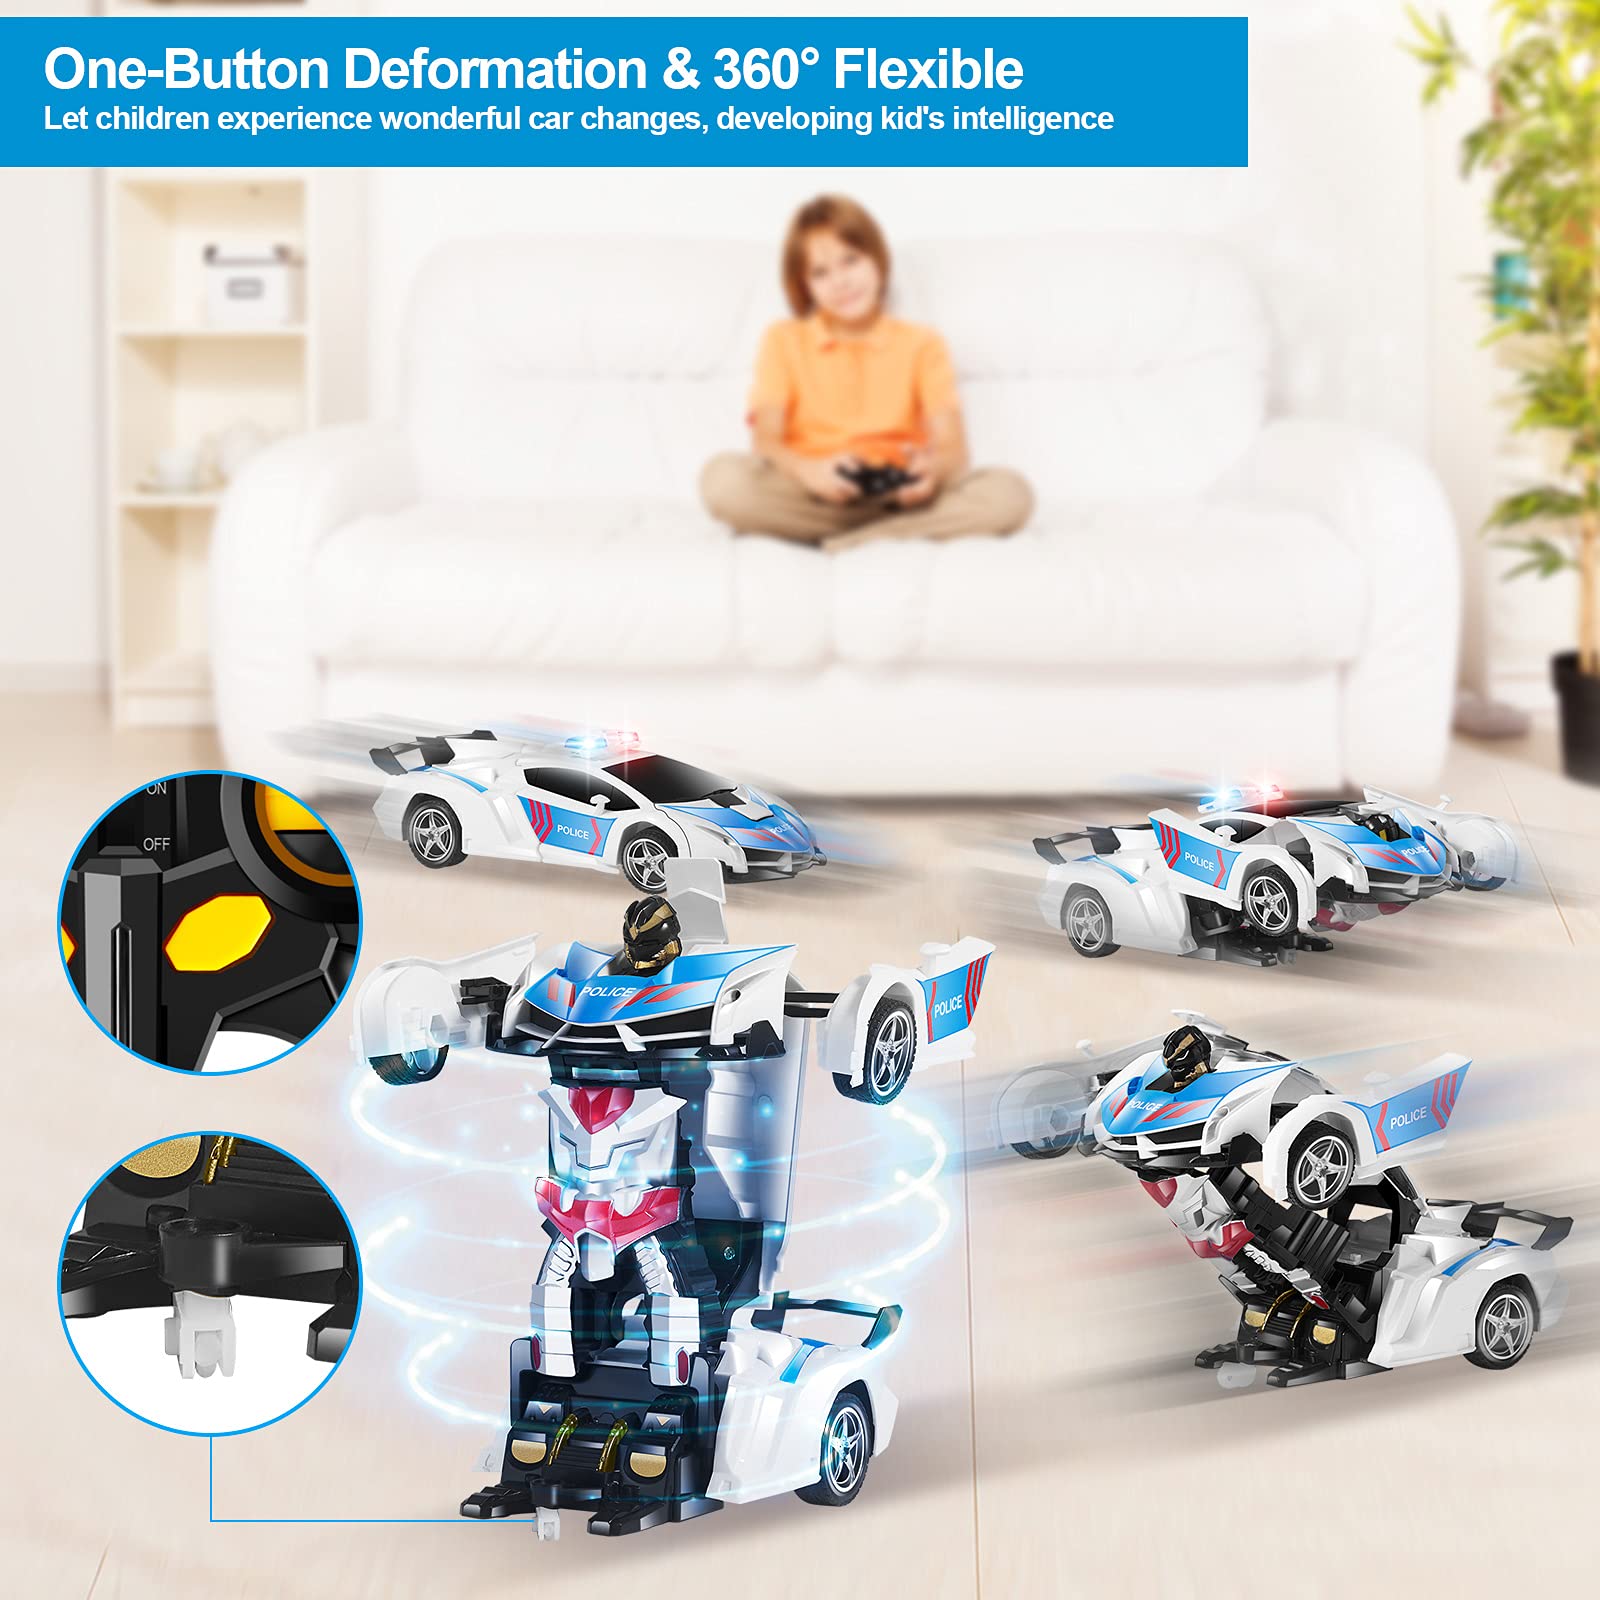 CEGOUFUN 1:18 Scale Transform RC Car Robot for Kids, Remote Control Car with One Button Deformation, 2.4Ghz Remote Control Police Toy Car with 360 Degree Drifting, Great Toys Gift for Boys Girls